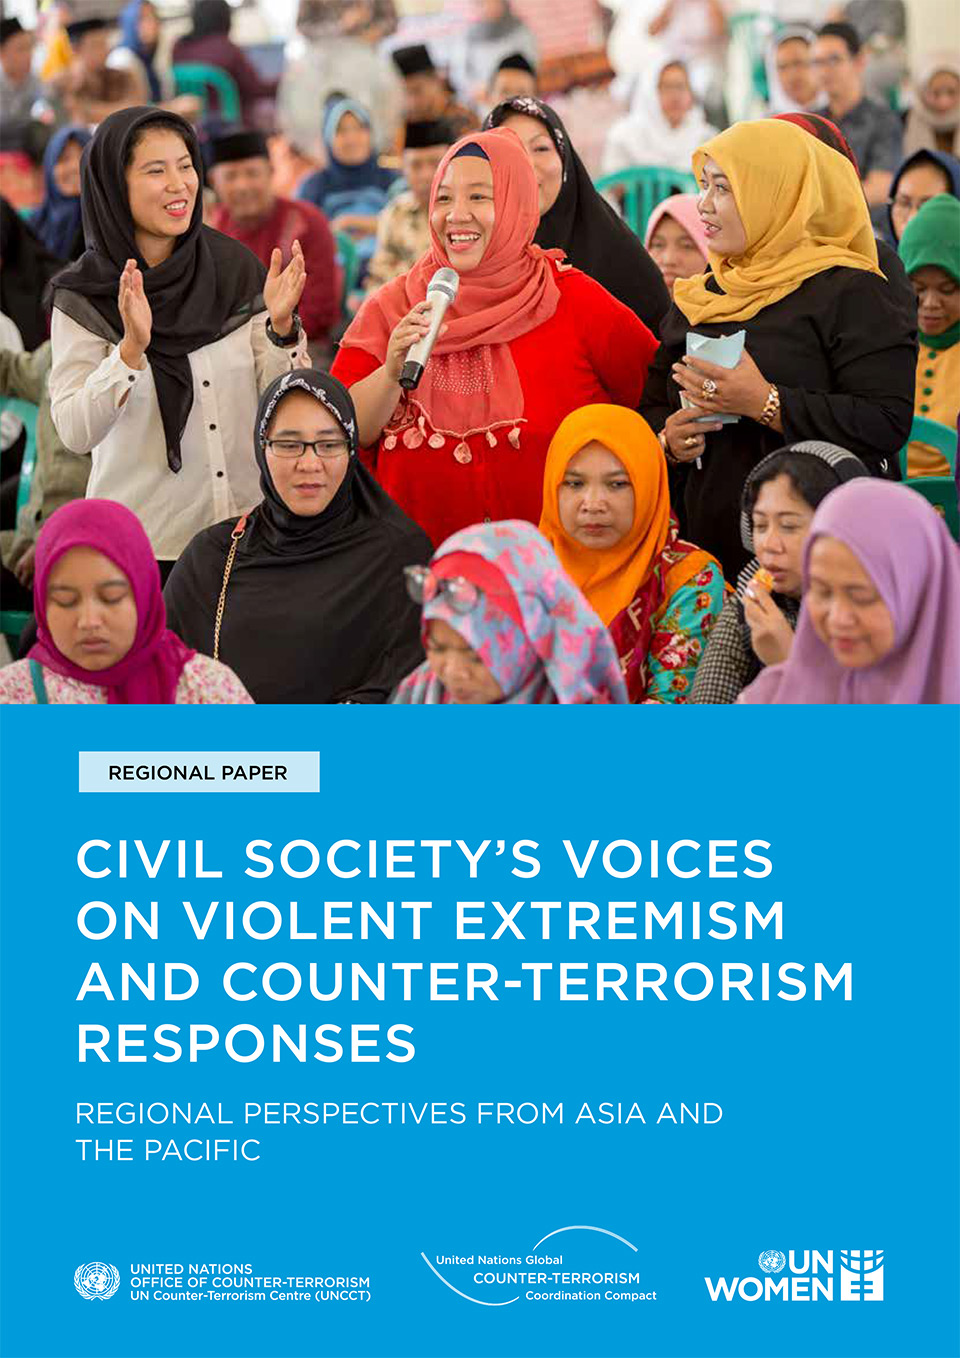 Civil society’s voices on violent extremism and counter-terrorism responses | Regional perspectives from asia and the pacific